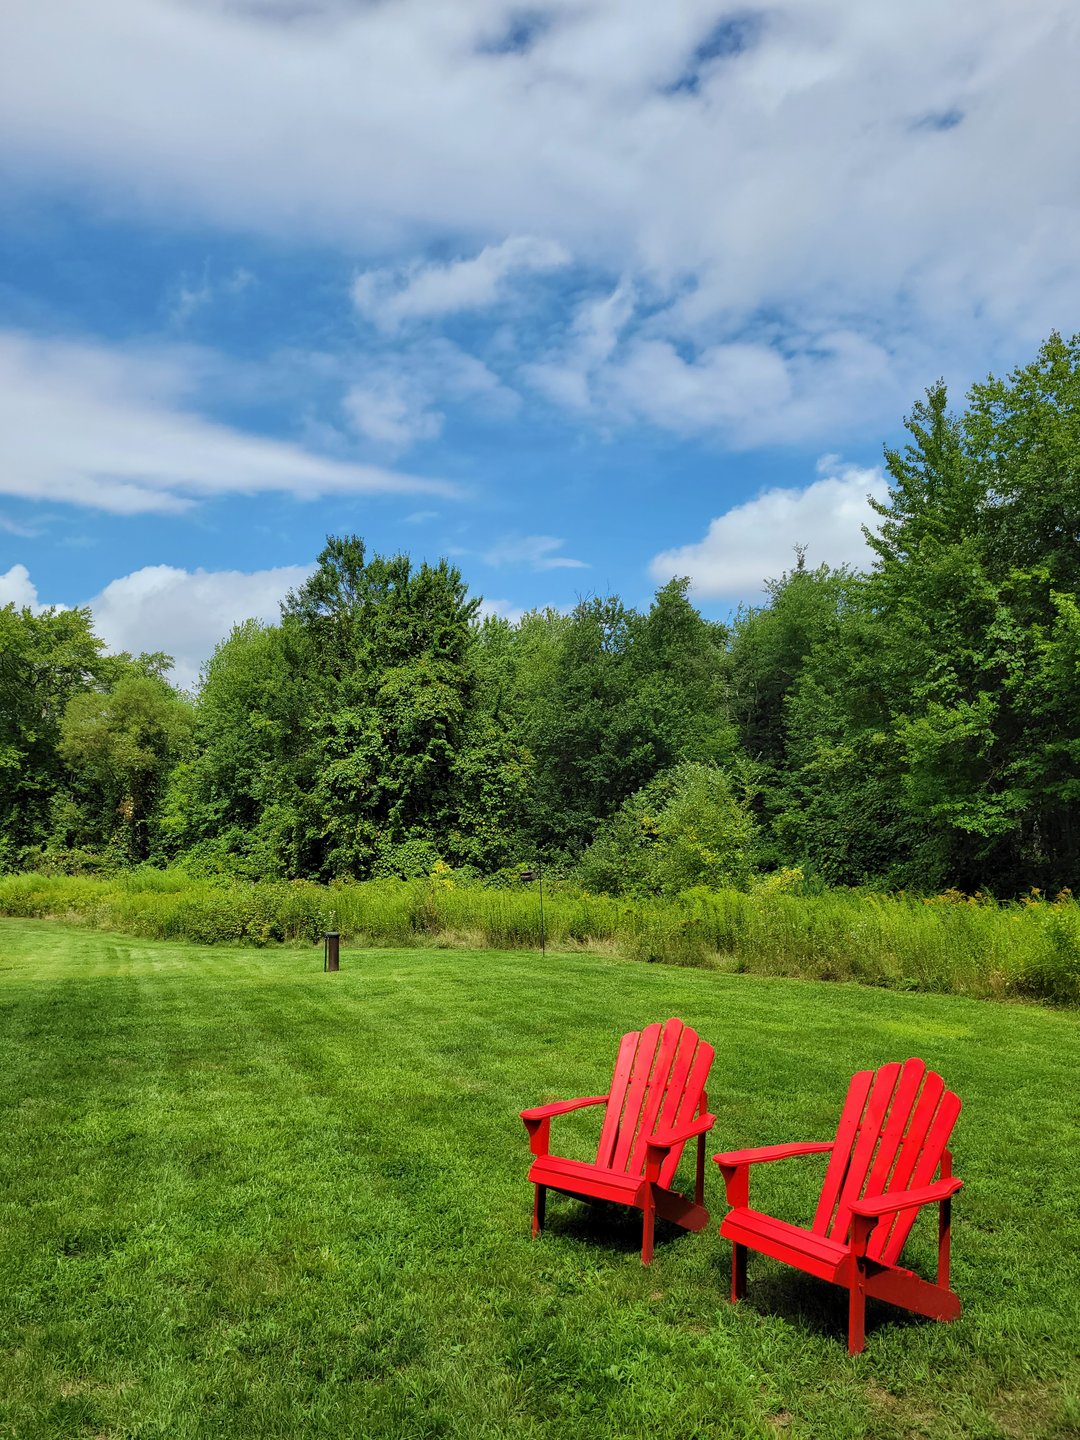 This photograph shows a bright blue sky with white fluffy clouds hanging above a healthy green lawn edged with trees. Two bright red chairs sit in the middle of the lawn.